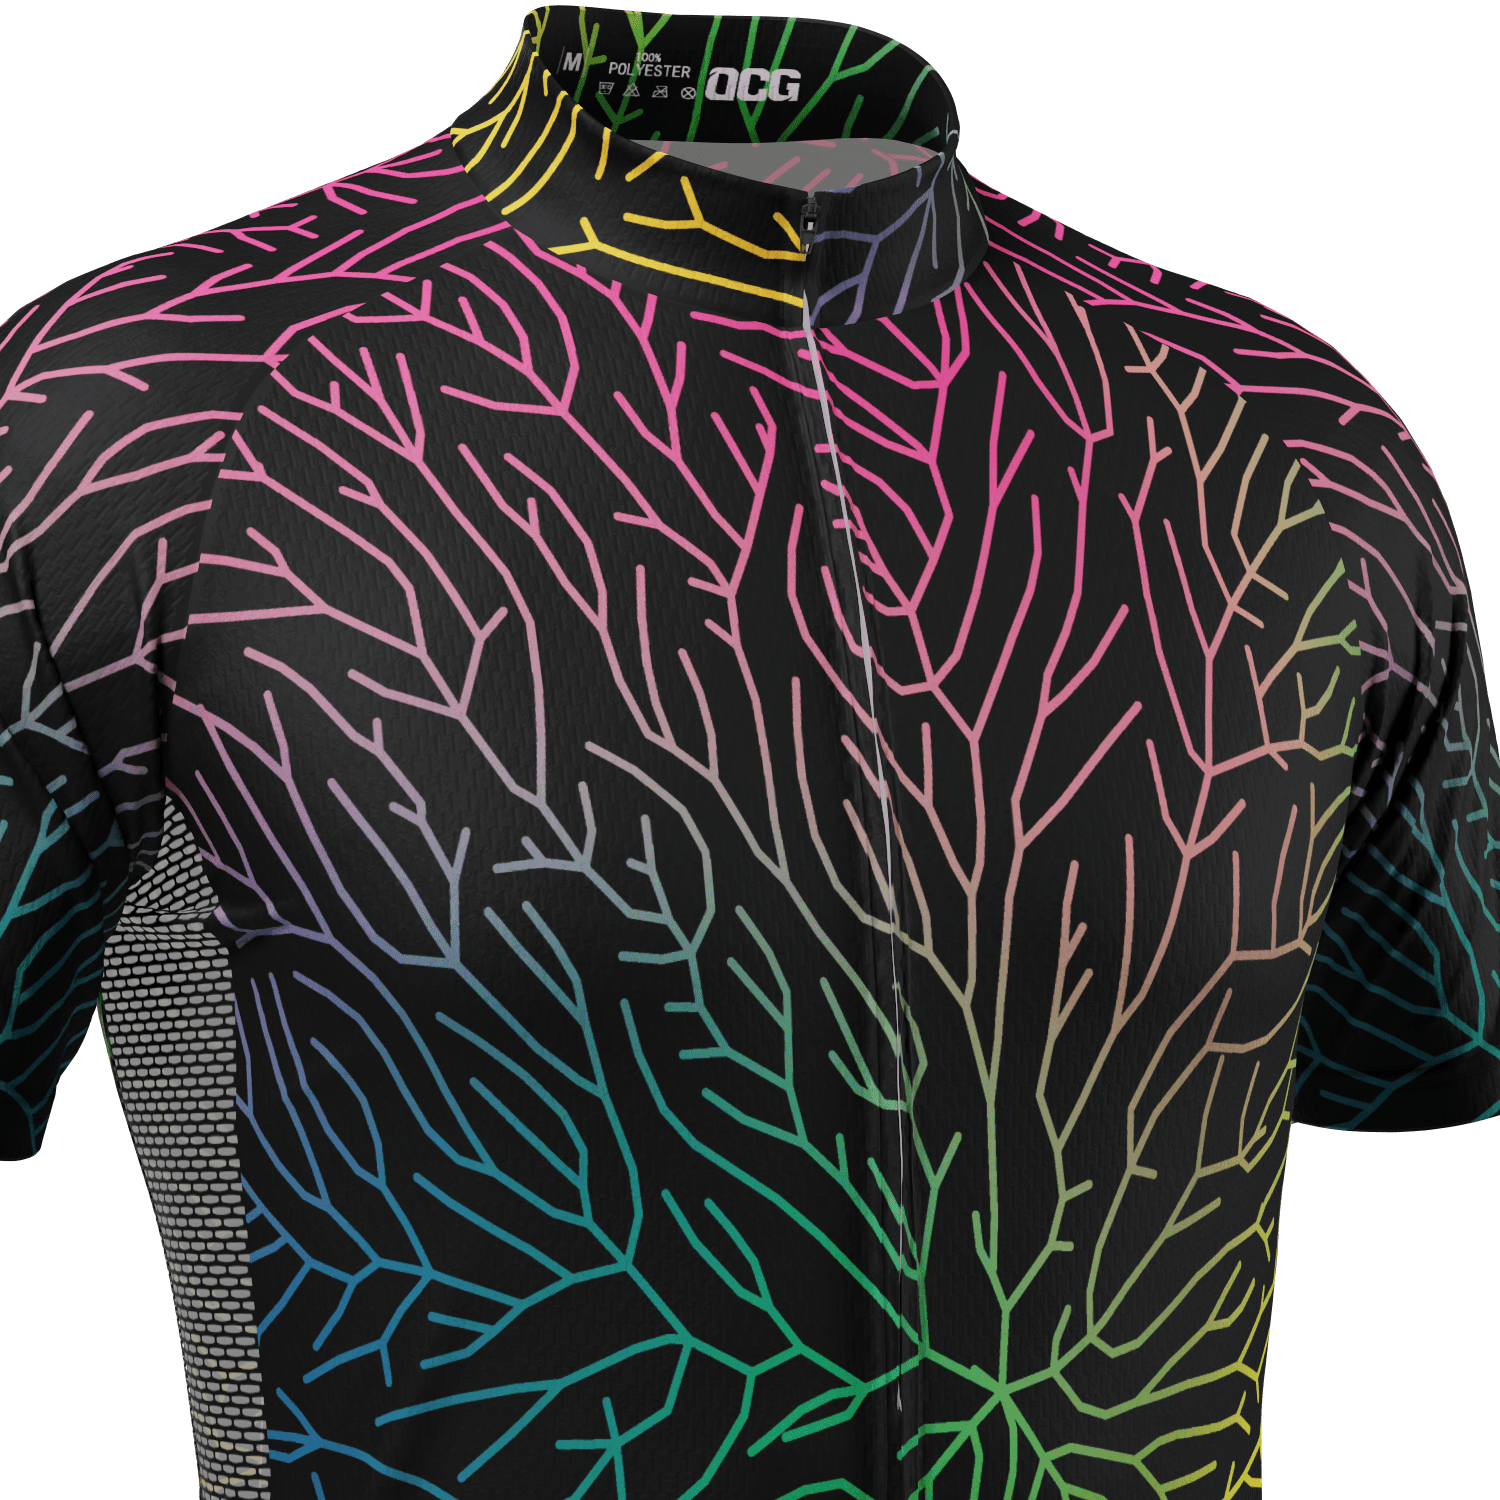 Men's Holographic Branches Short Sleeve Cycling Jersey